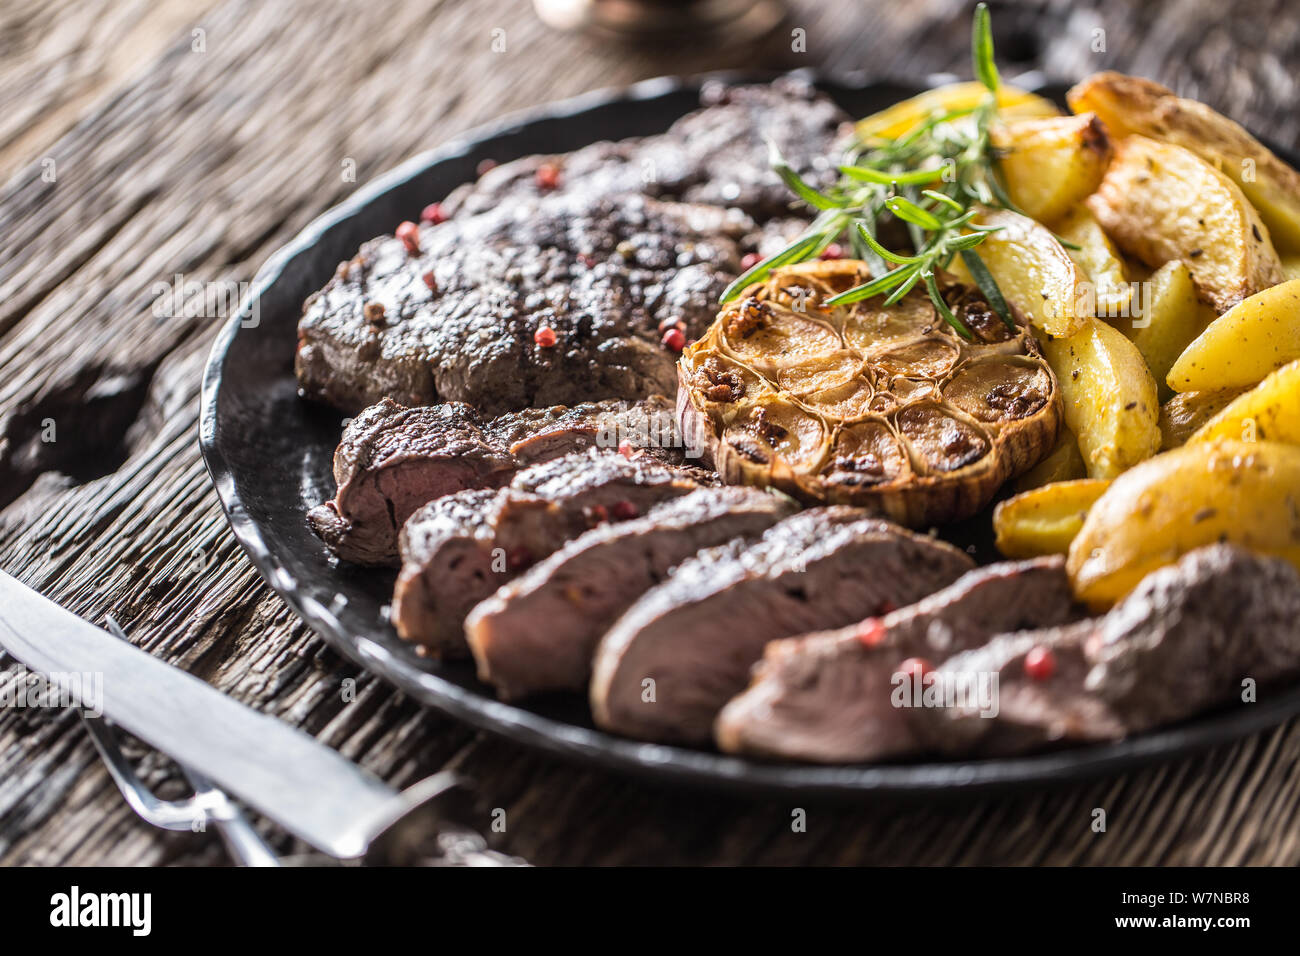 Grilled beef Rib Eye steak with garlic american potatoes rosemary salt and spices Stock Photo